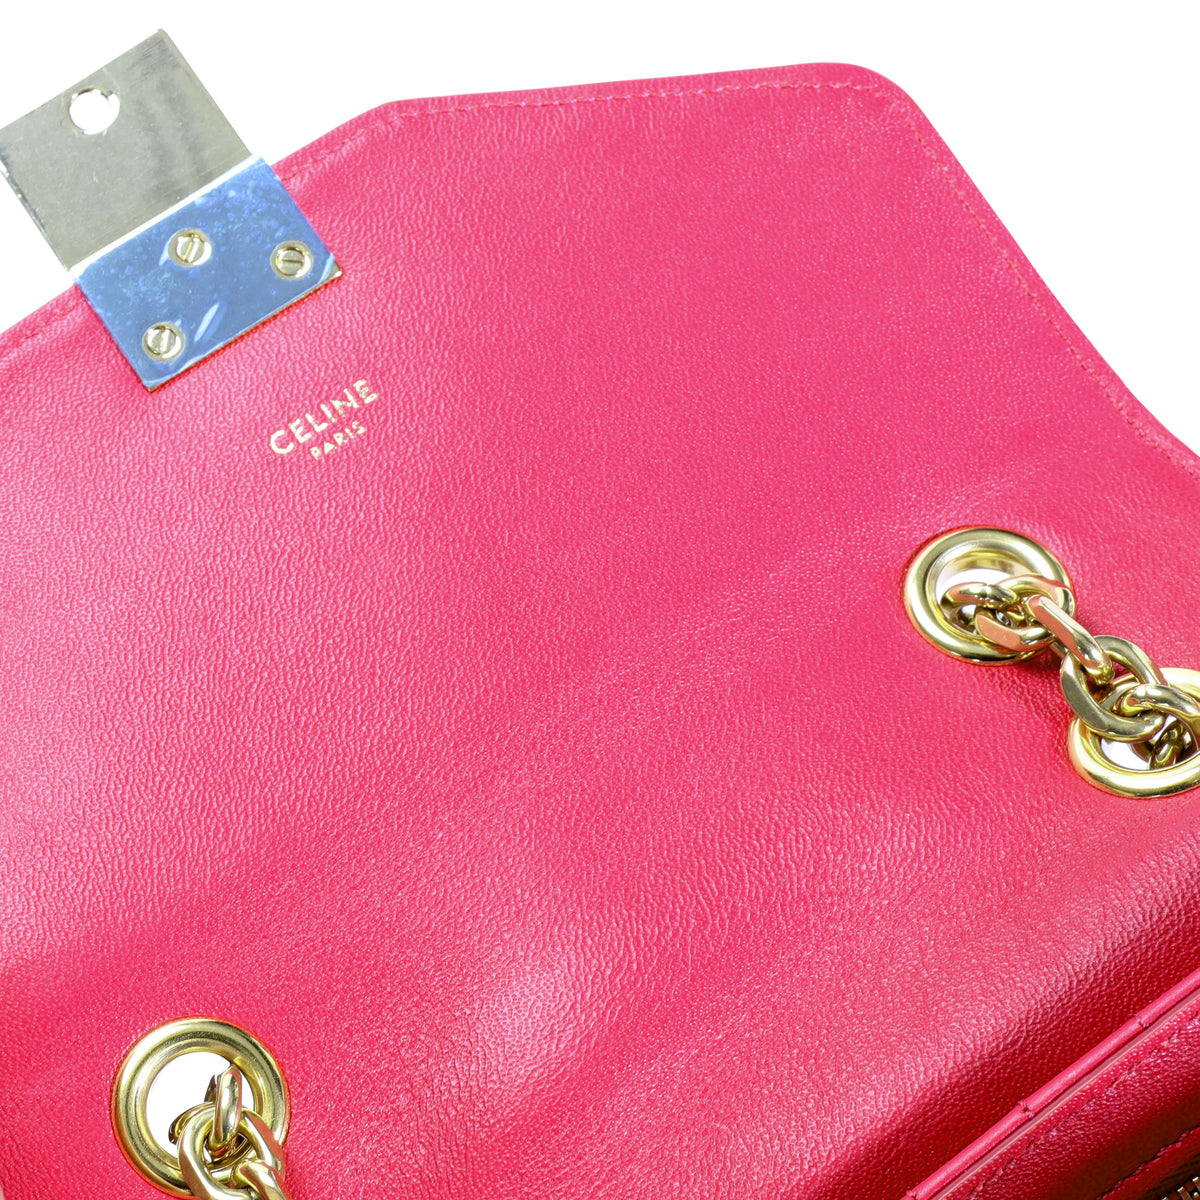 Celine Hot Pink Quilted Calfskin Small C Bag